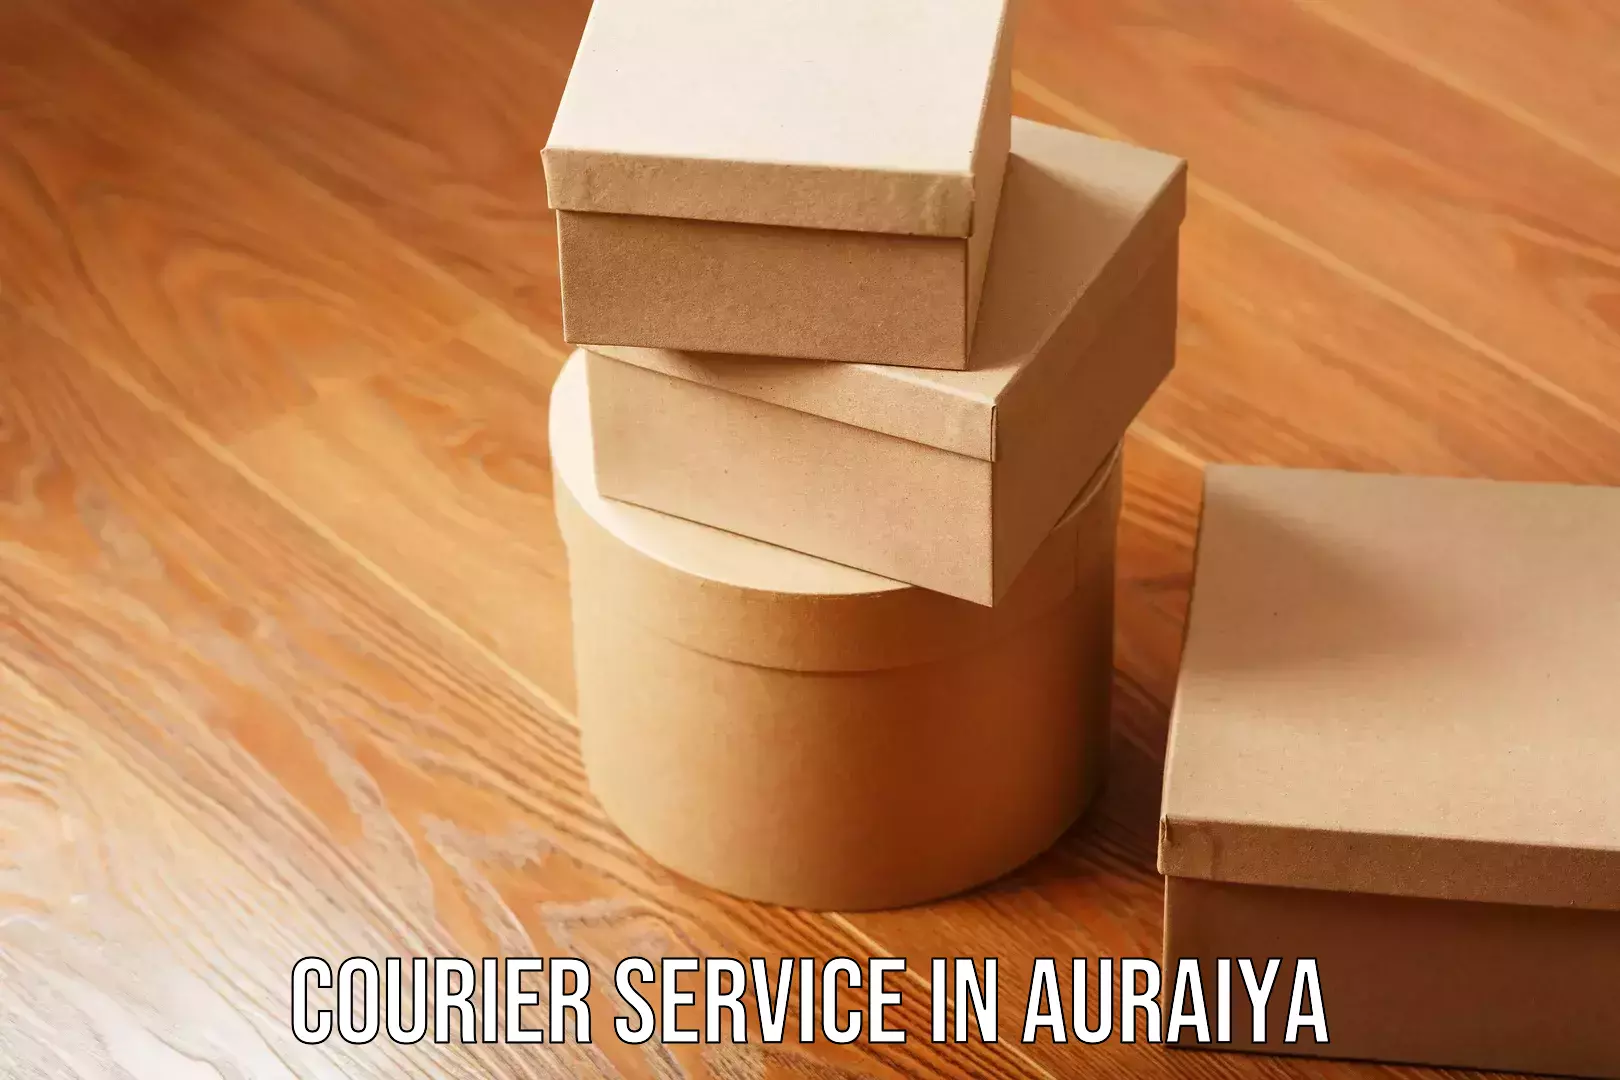 Quality courier partnerships in Auraiya